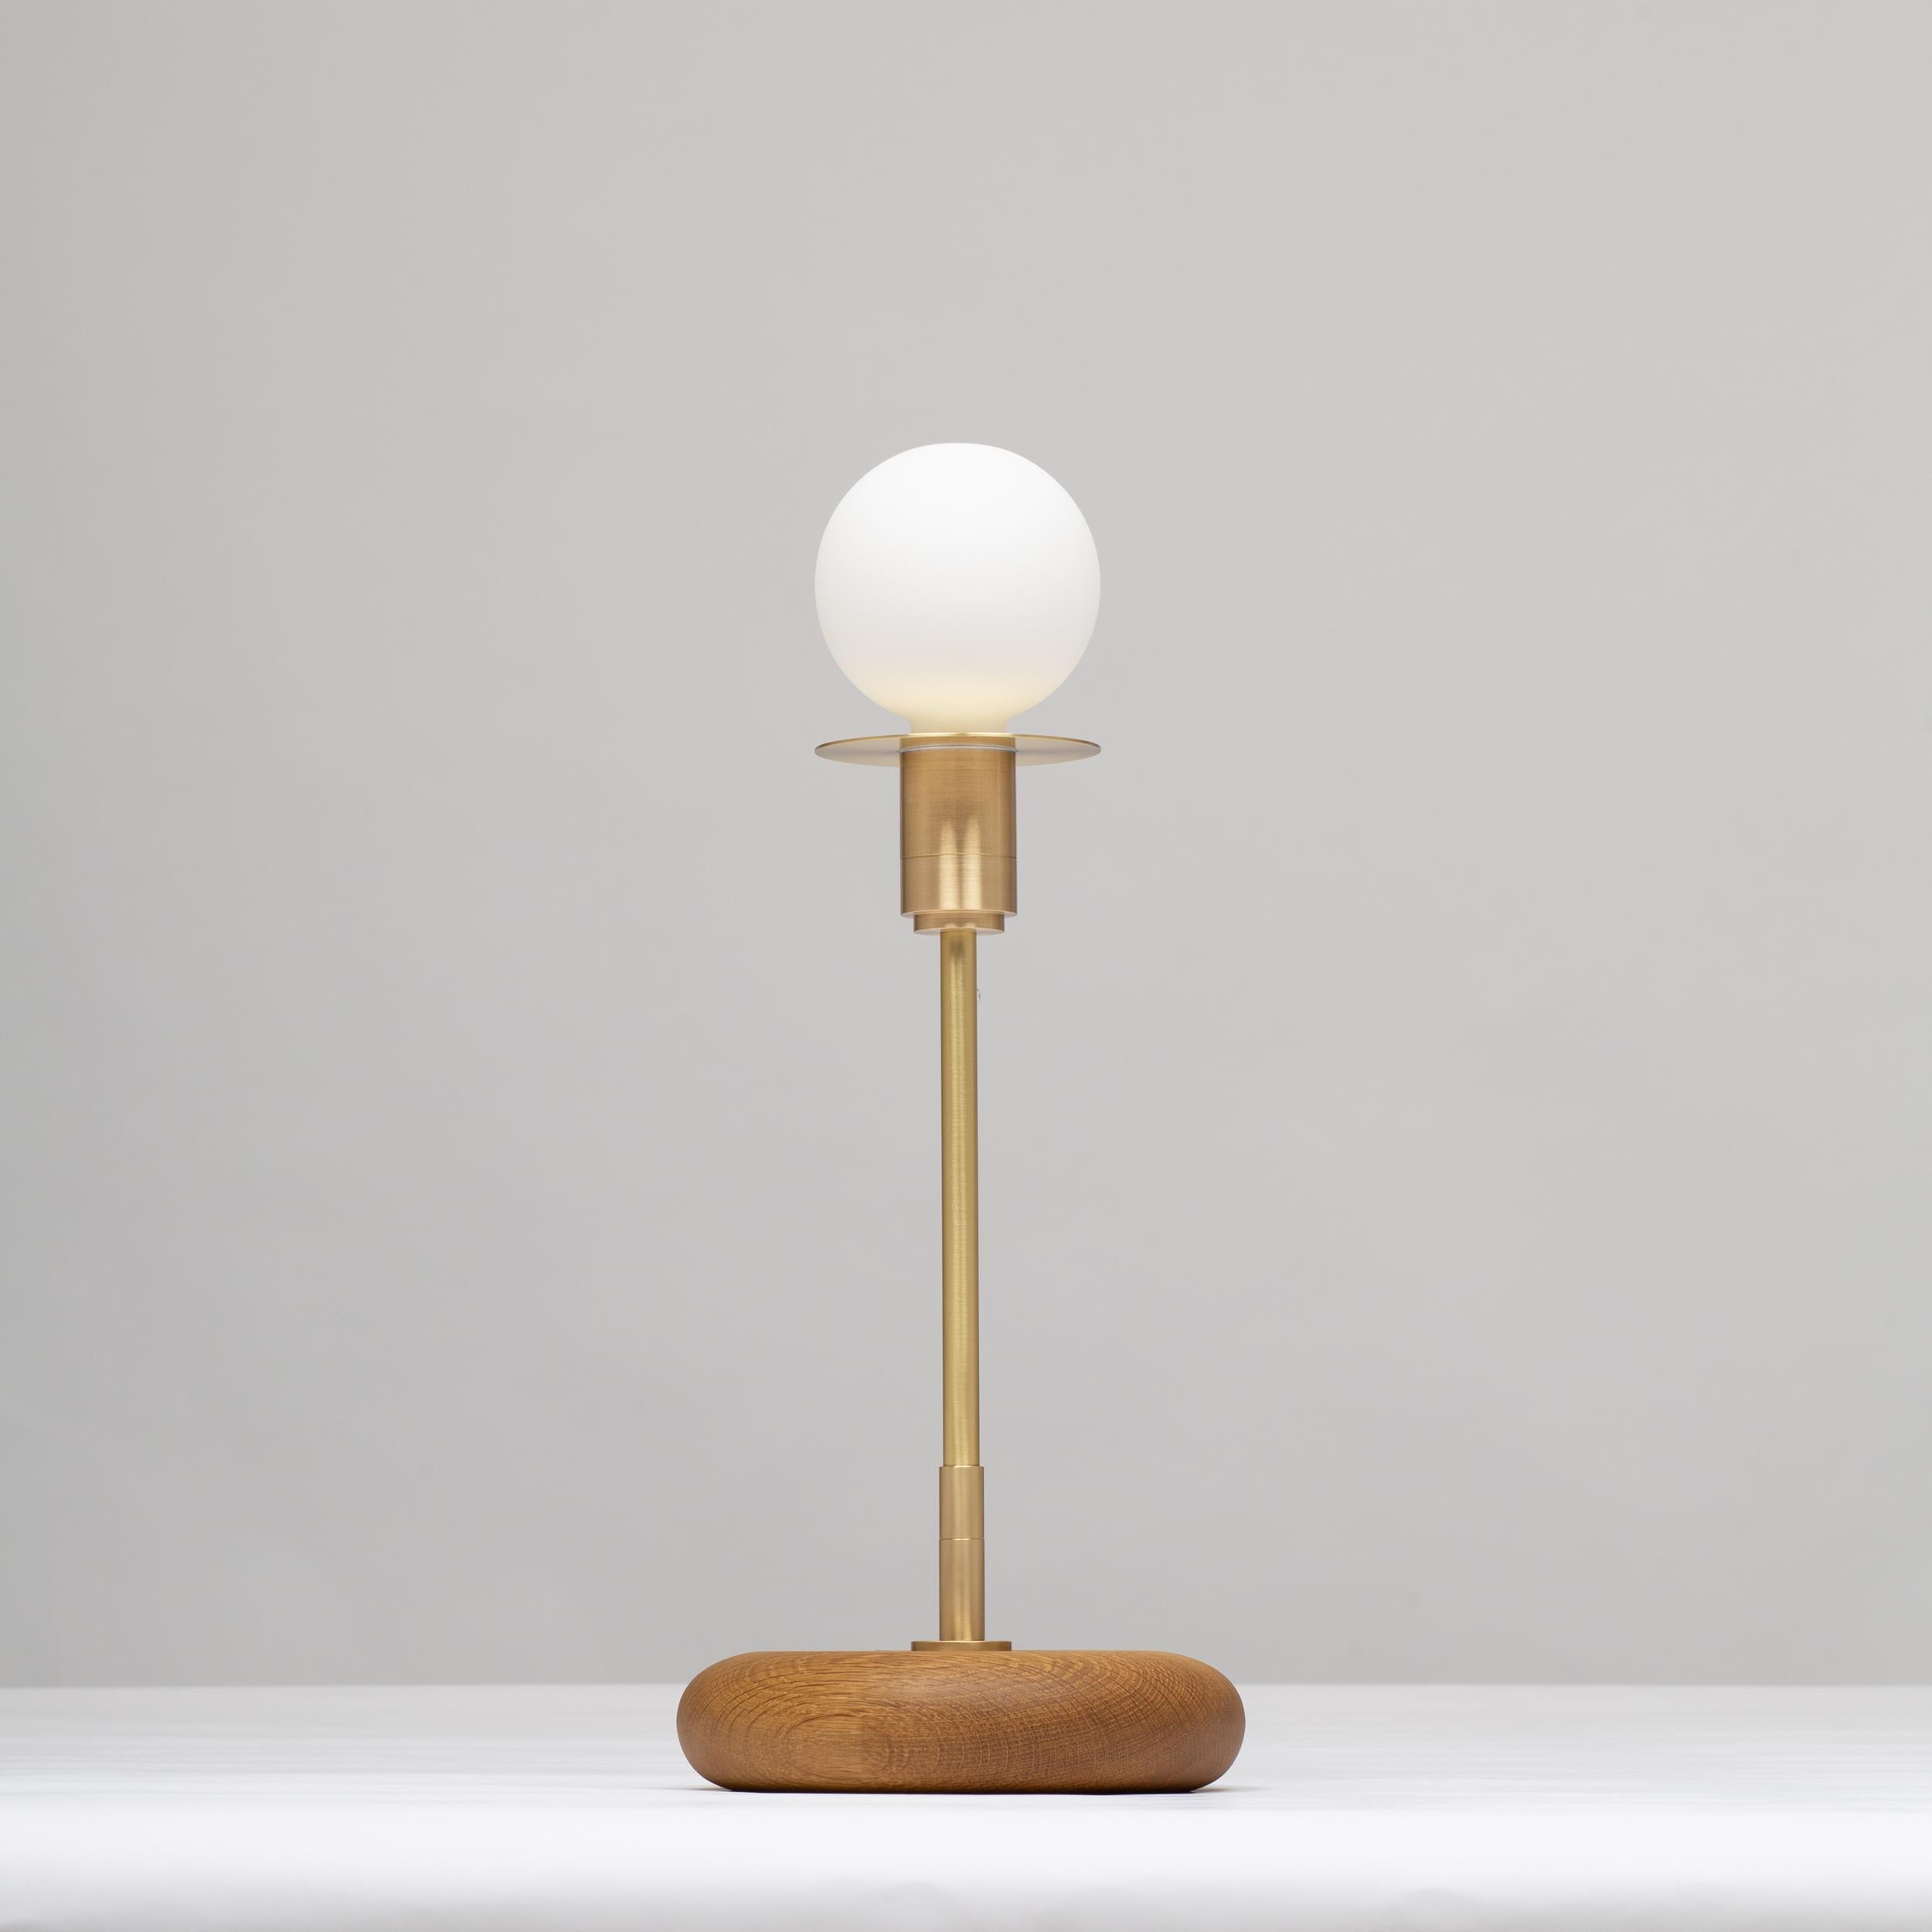 Handturned English Smoked Oak Pebble Table Lamp. Pure Monocoat natural oil finish.
Solid brass, Satin finish. Spun Brass Disc. Lacquered. 
Inline LED dimmer. Linen Fabric Cable.
2000K - 2800K  95CRI
600 Dim to Warm Lumens
Sphere III bulb included
MK